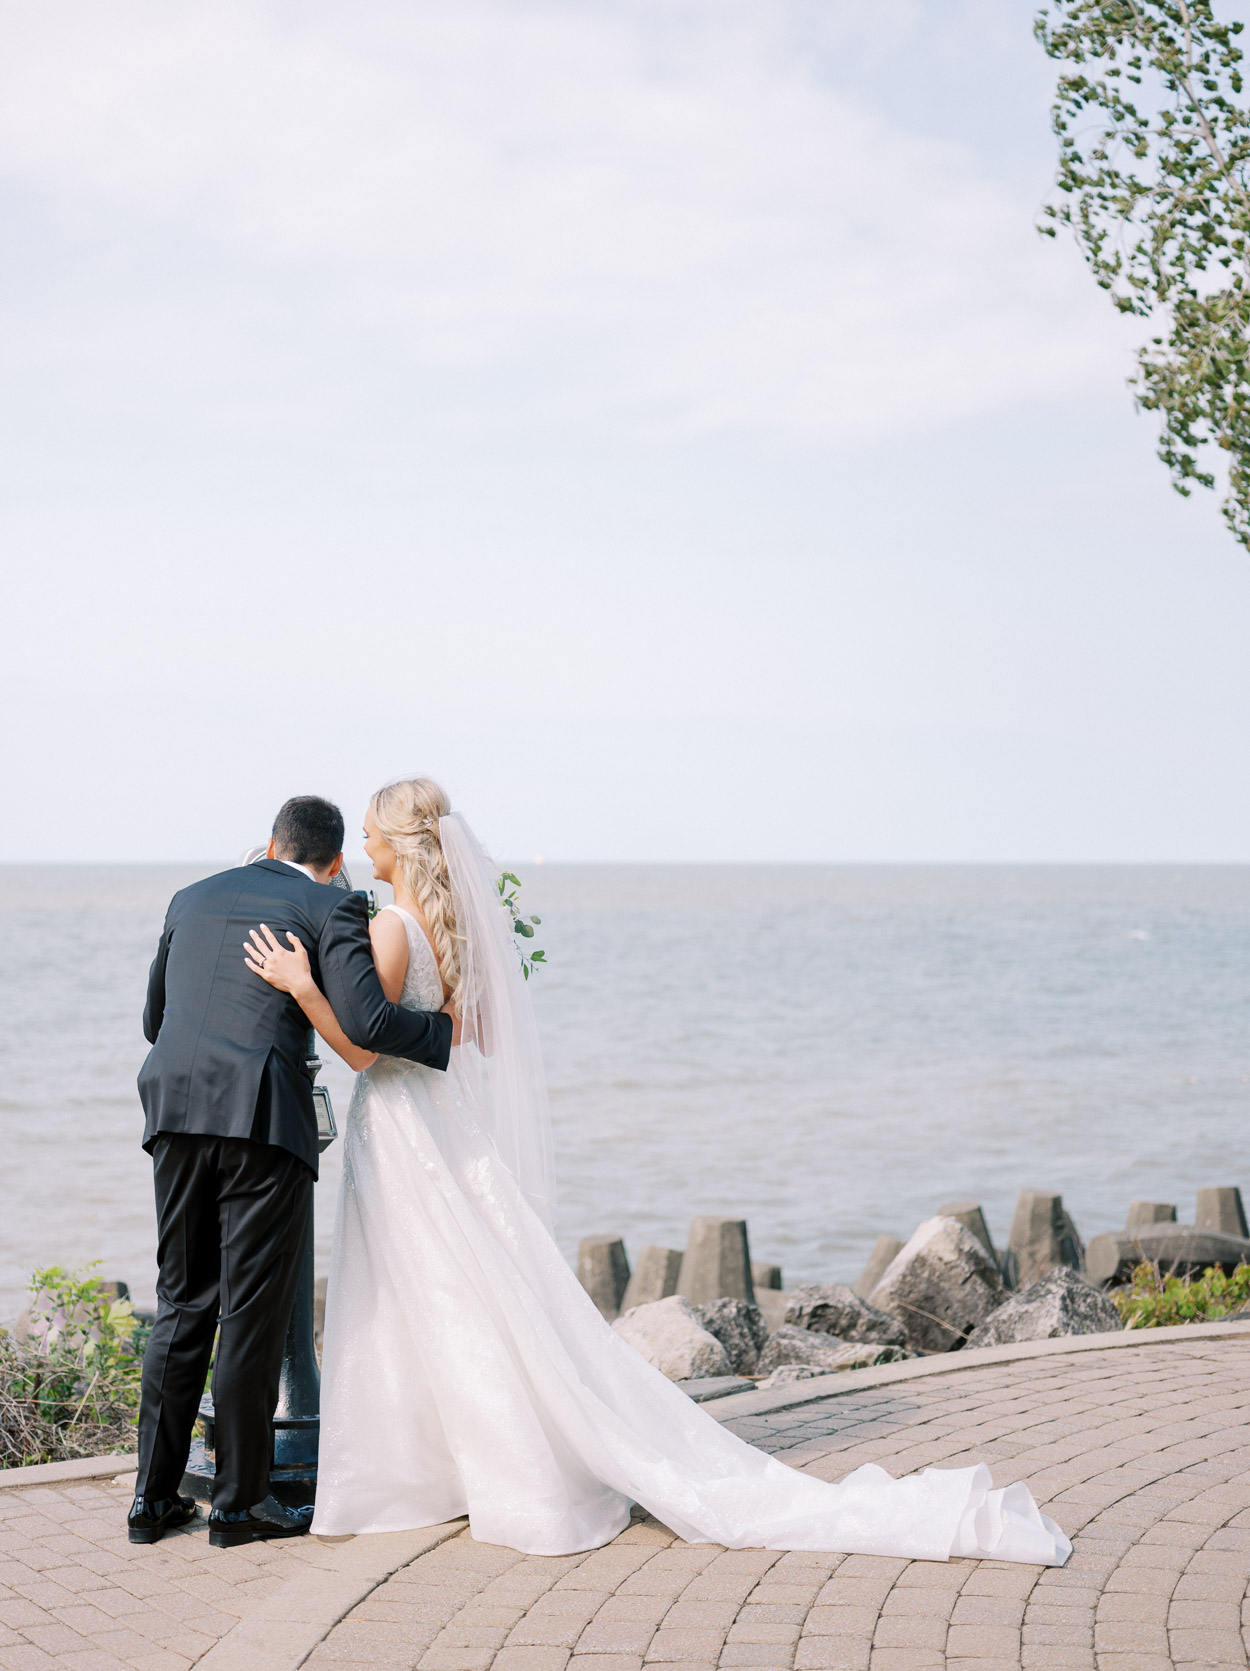 Bride and groom portraits at Lakewood Park in Cleveland, Ohio